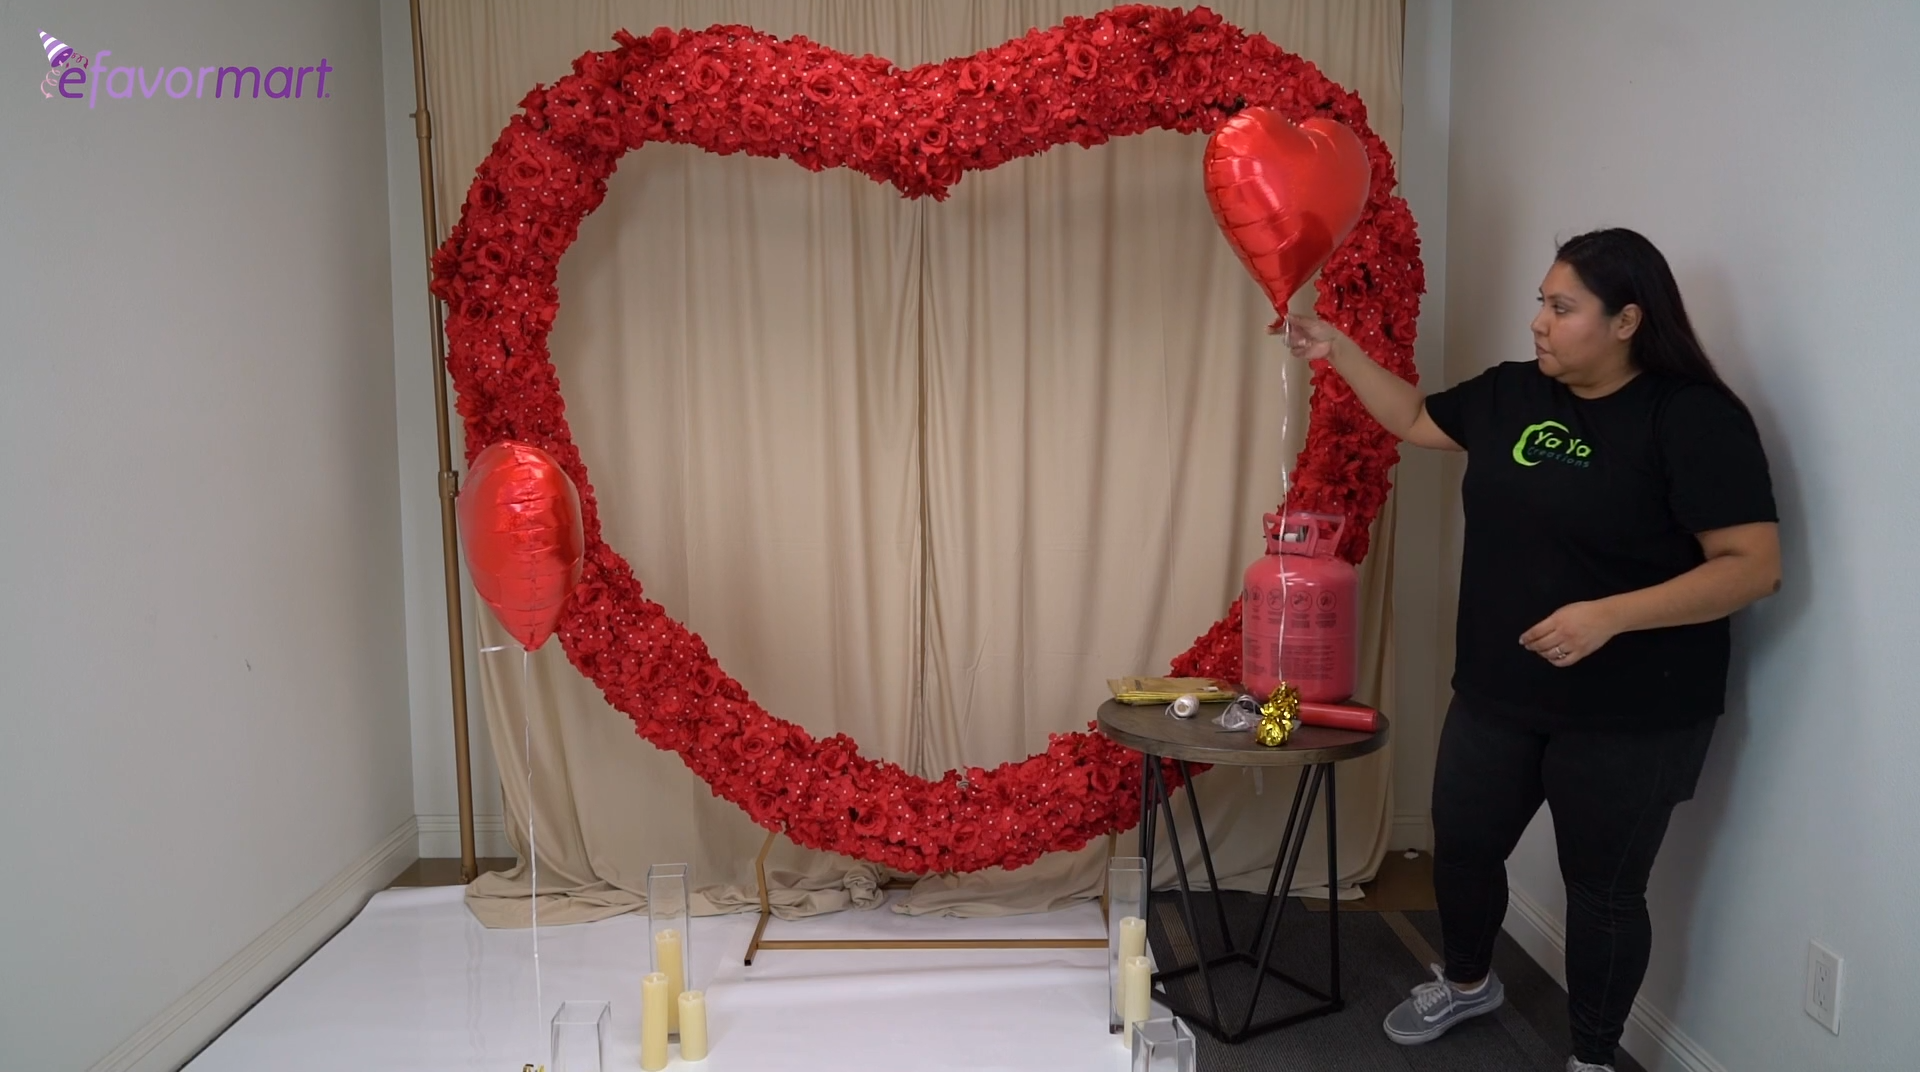 Heart balloons with aisle runners on the floor